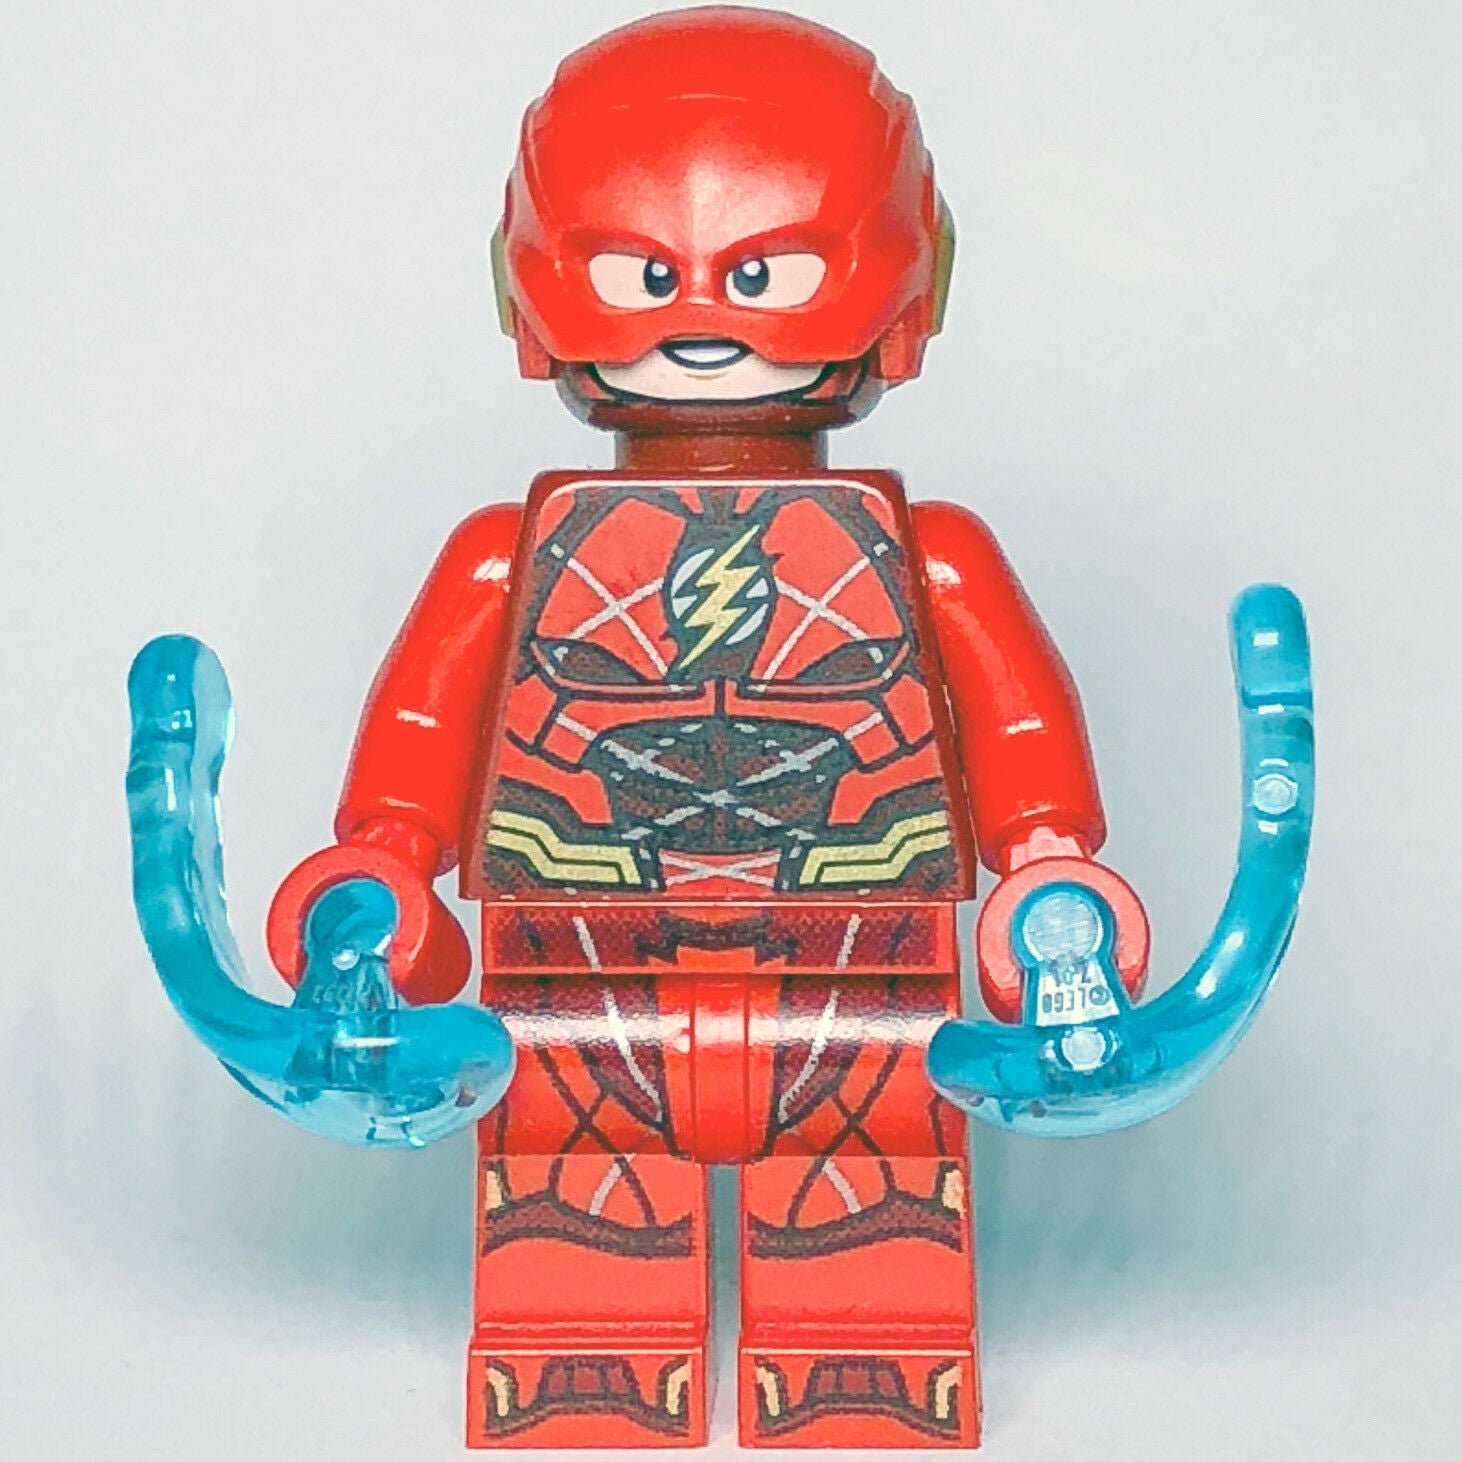 DC Super Heroes LEGO The Flash Justice League Minifigure from set 76086 - Bricks & Figures